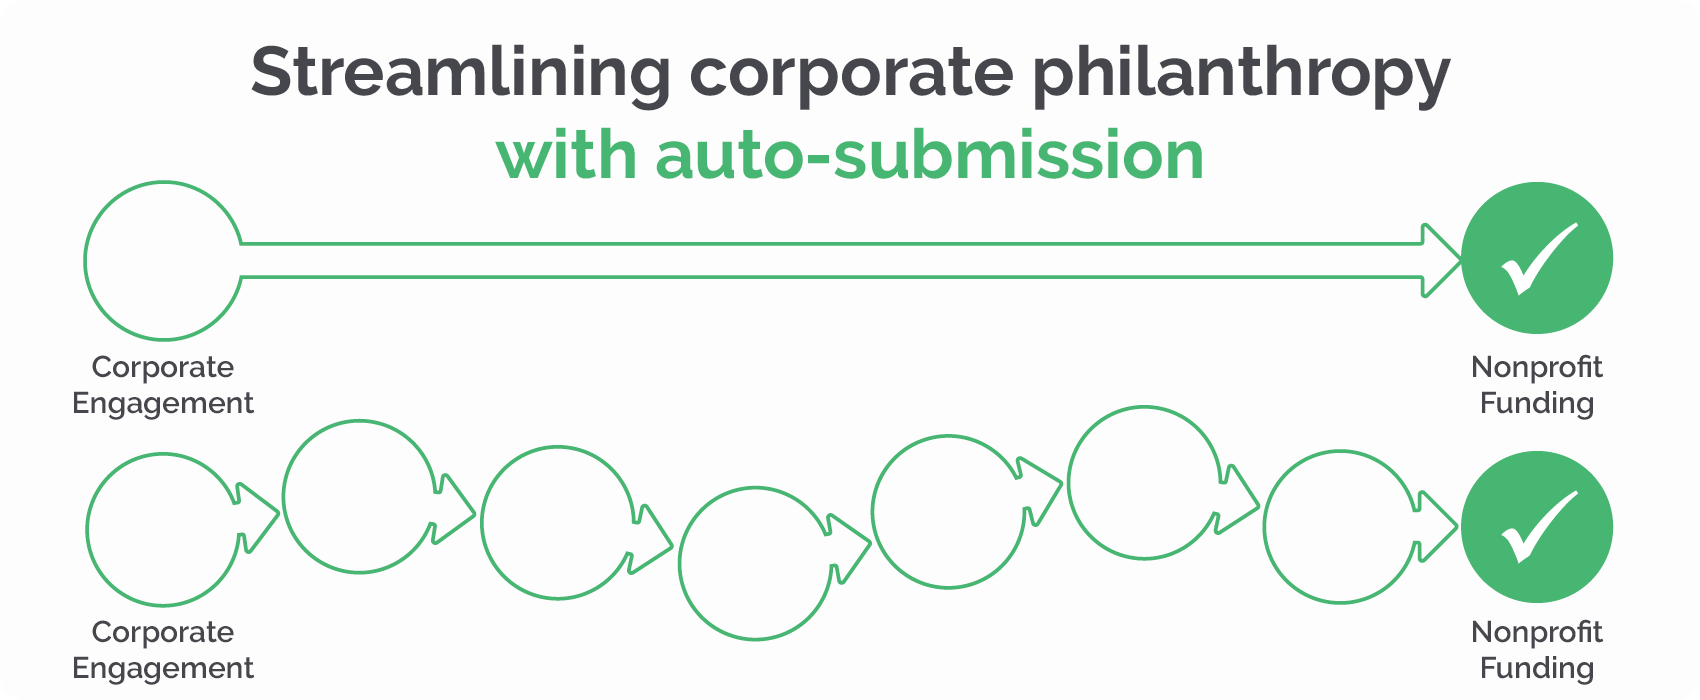 Streamlining corporate philanthropy with auto-submission